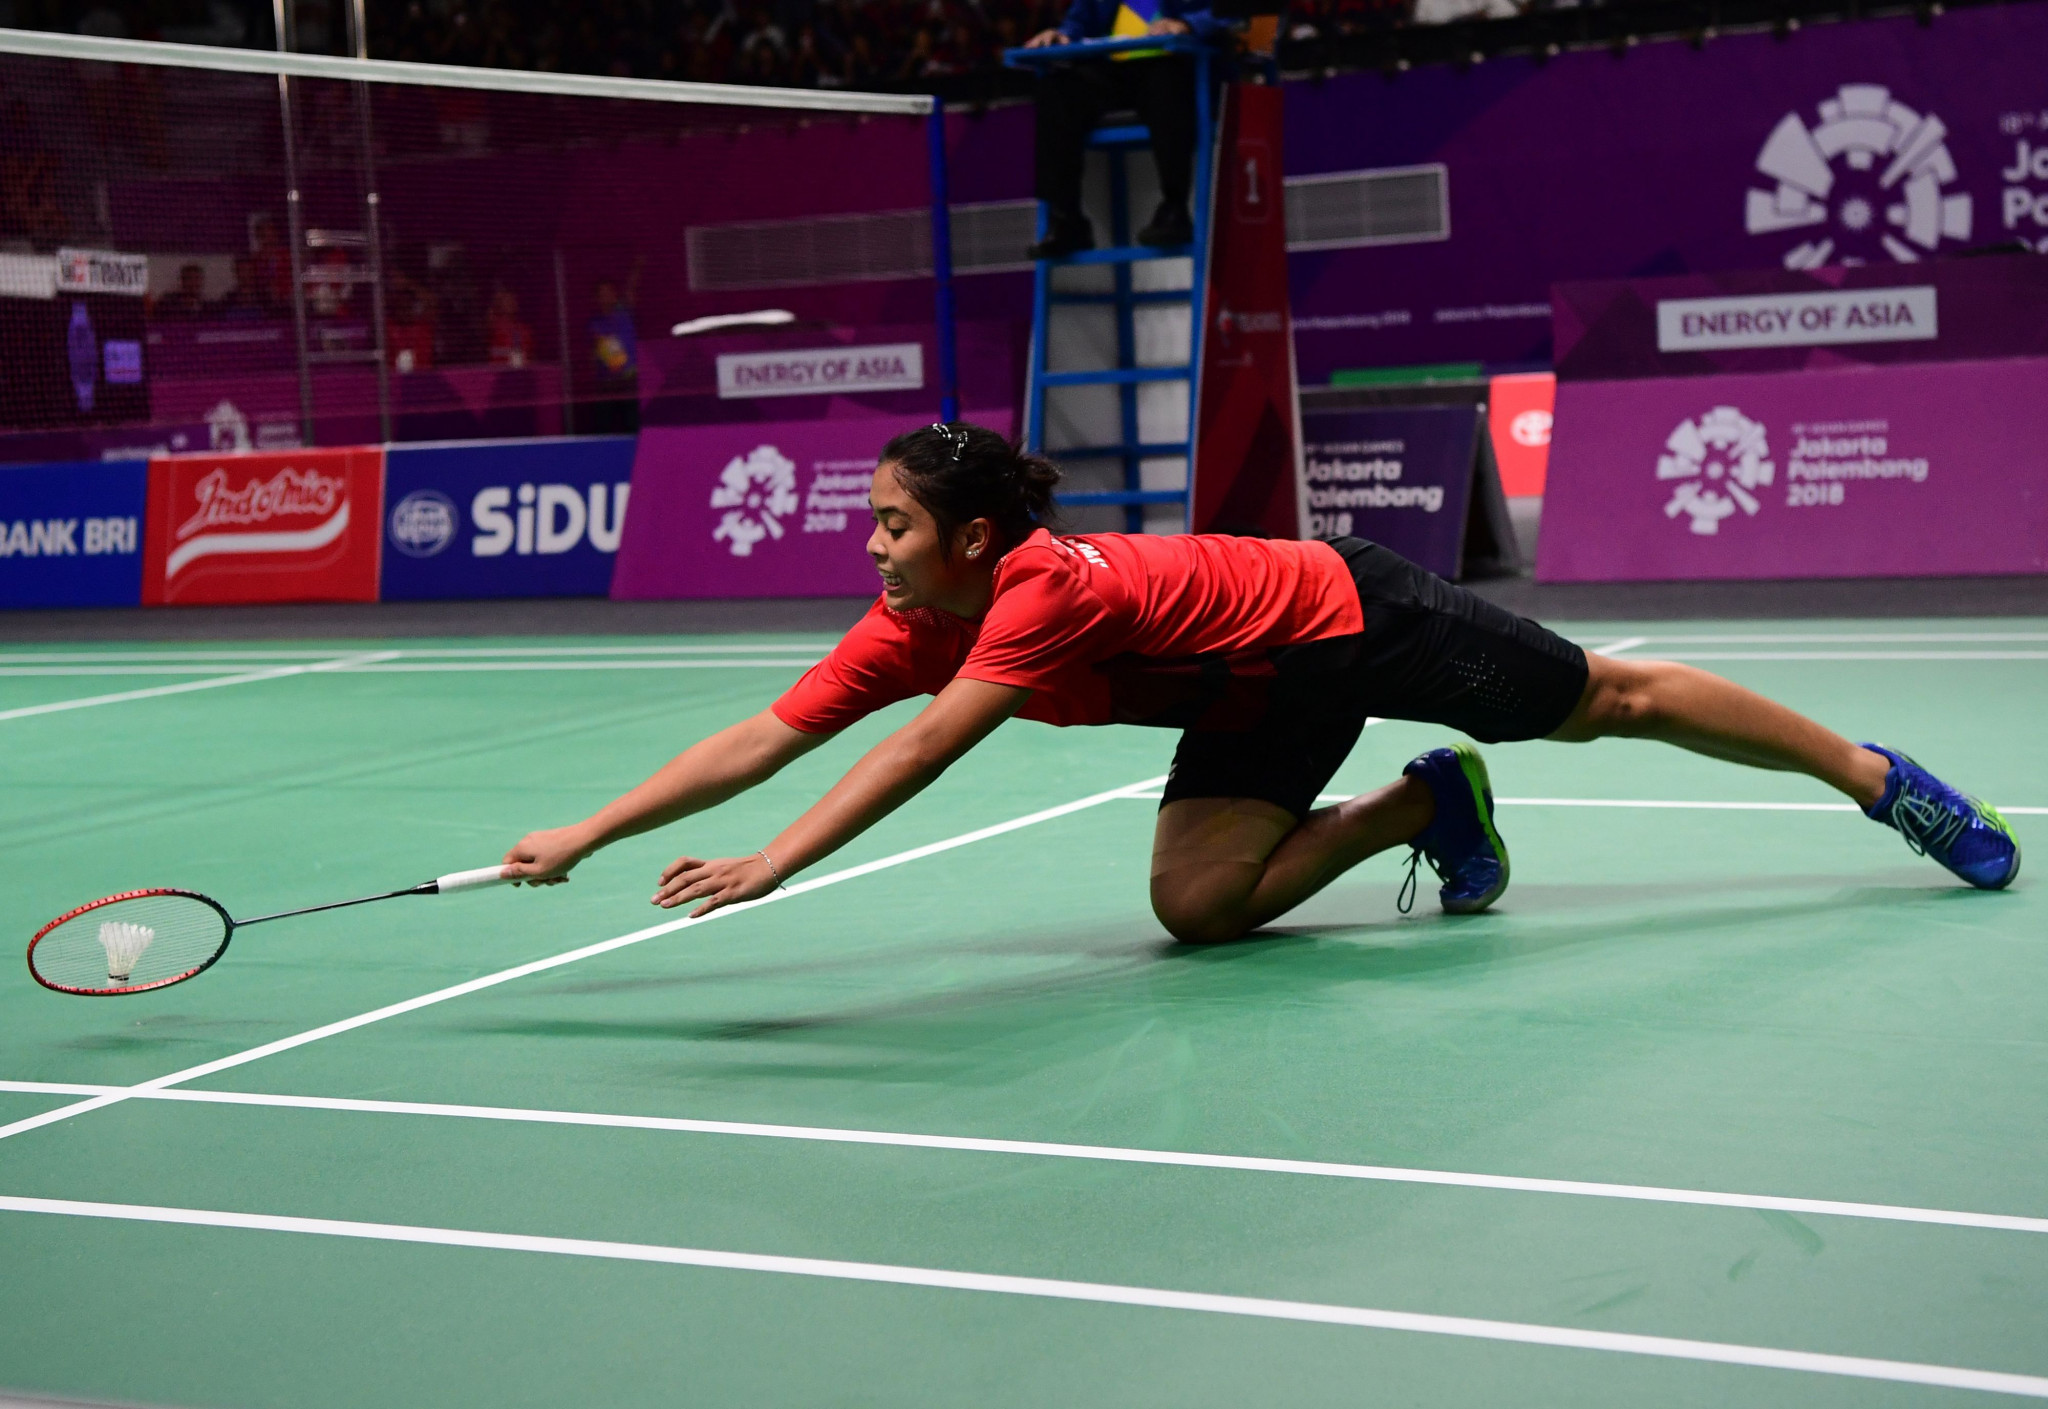 Indonesia's women's badminton team, including Gregoria Mariska Tunjung, had to settle for bronze after losing in the semi-finals to Japan ©Getty Images